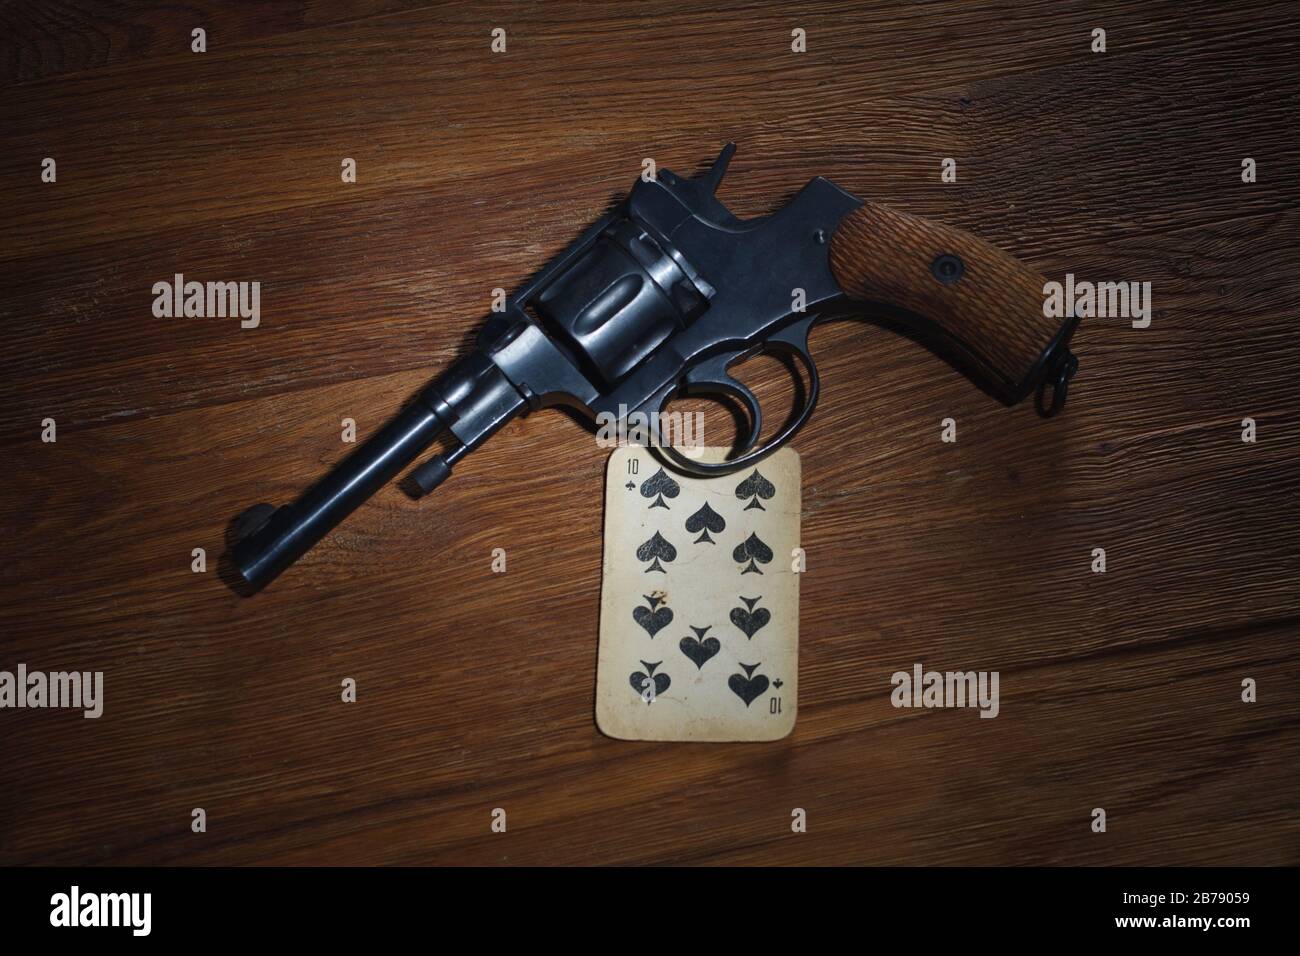 russian roulette - Ten of Spades plaing card and revolver with one cartridge in drum on wooden table background Stock Photo